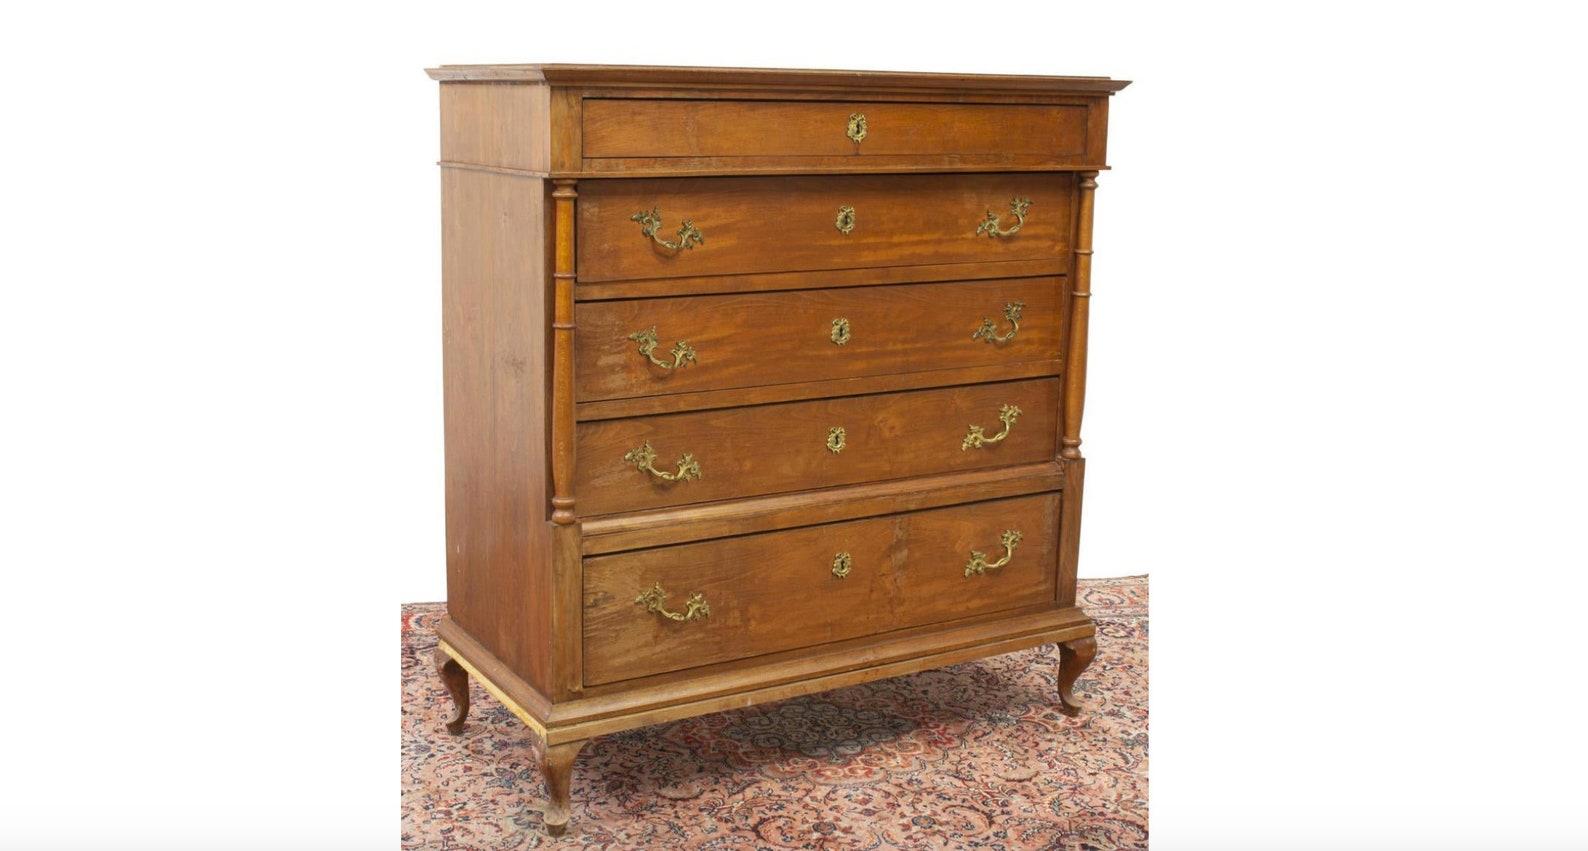 A monumental Danish chest of drawers commode from the 19th century. The magnificent, handcrafted Scandinavian antique having molded cornice, over case fitted with five drawers, all with dovetail joinery, the upper with divided interior and matched